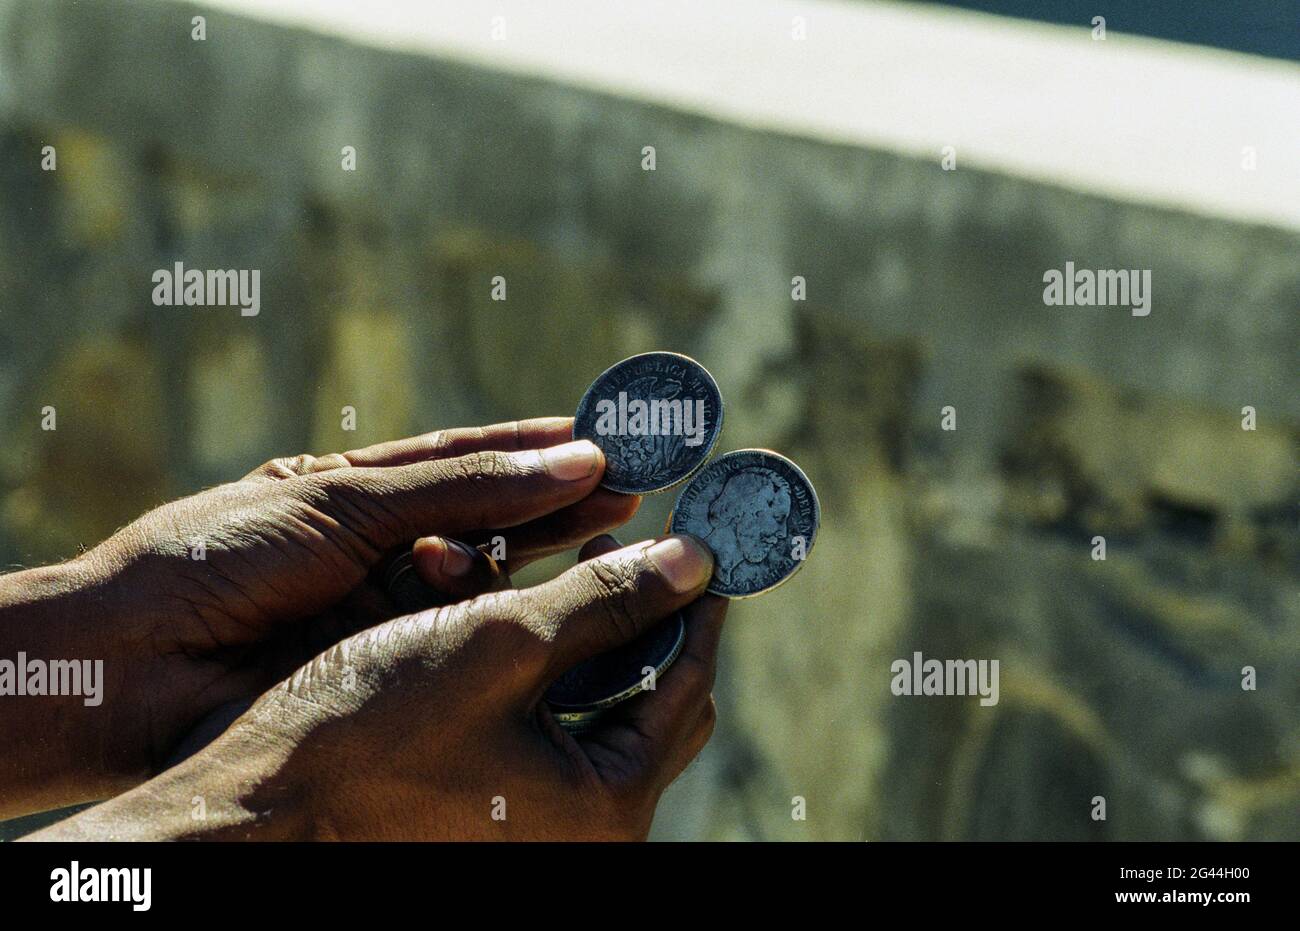 May 20, 2002-Dili, Timor-Leste-In This Photos taken Independence day scene and Timorese daily life on 7day in Dili and Atambua Village. Man hold show Timorese Coin at Comoro village, Timor-Leste. Stock Photo